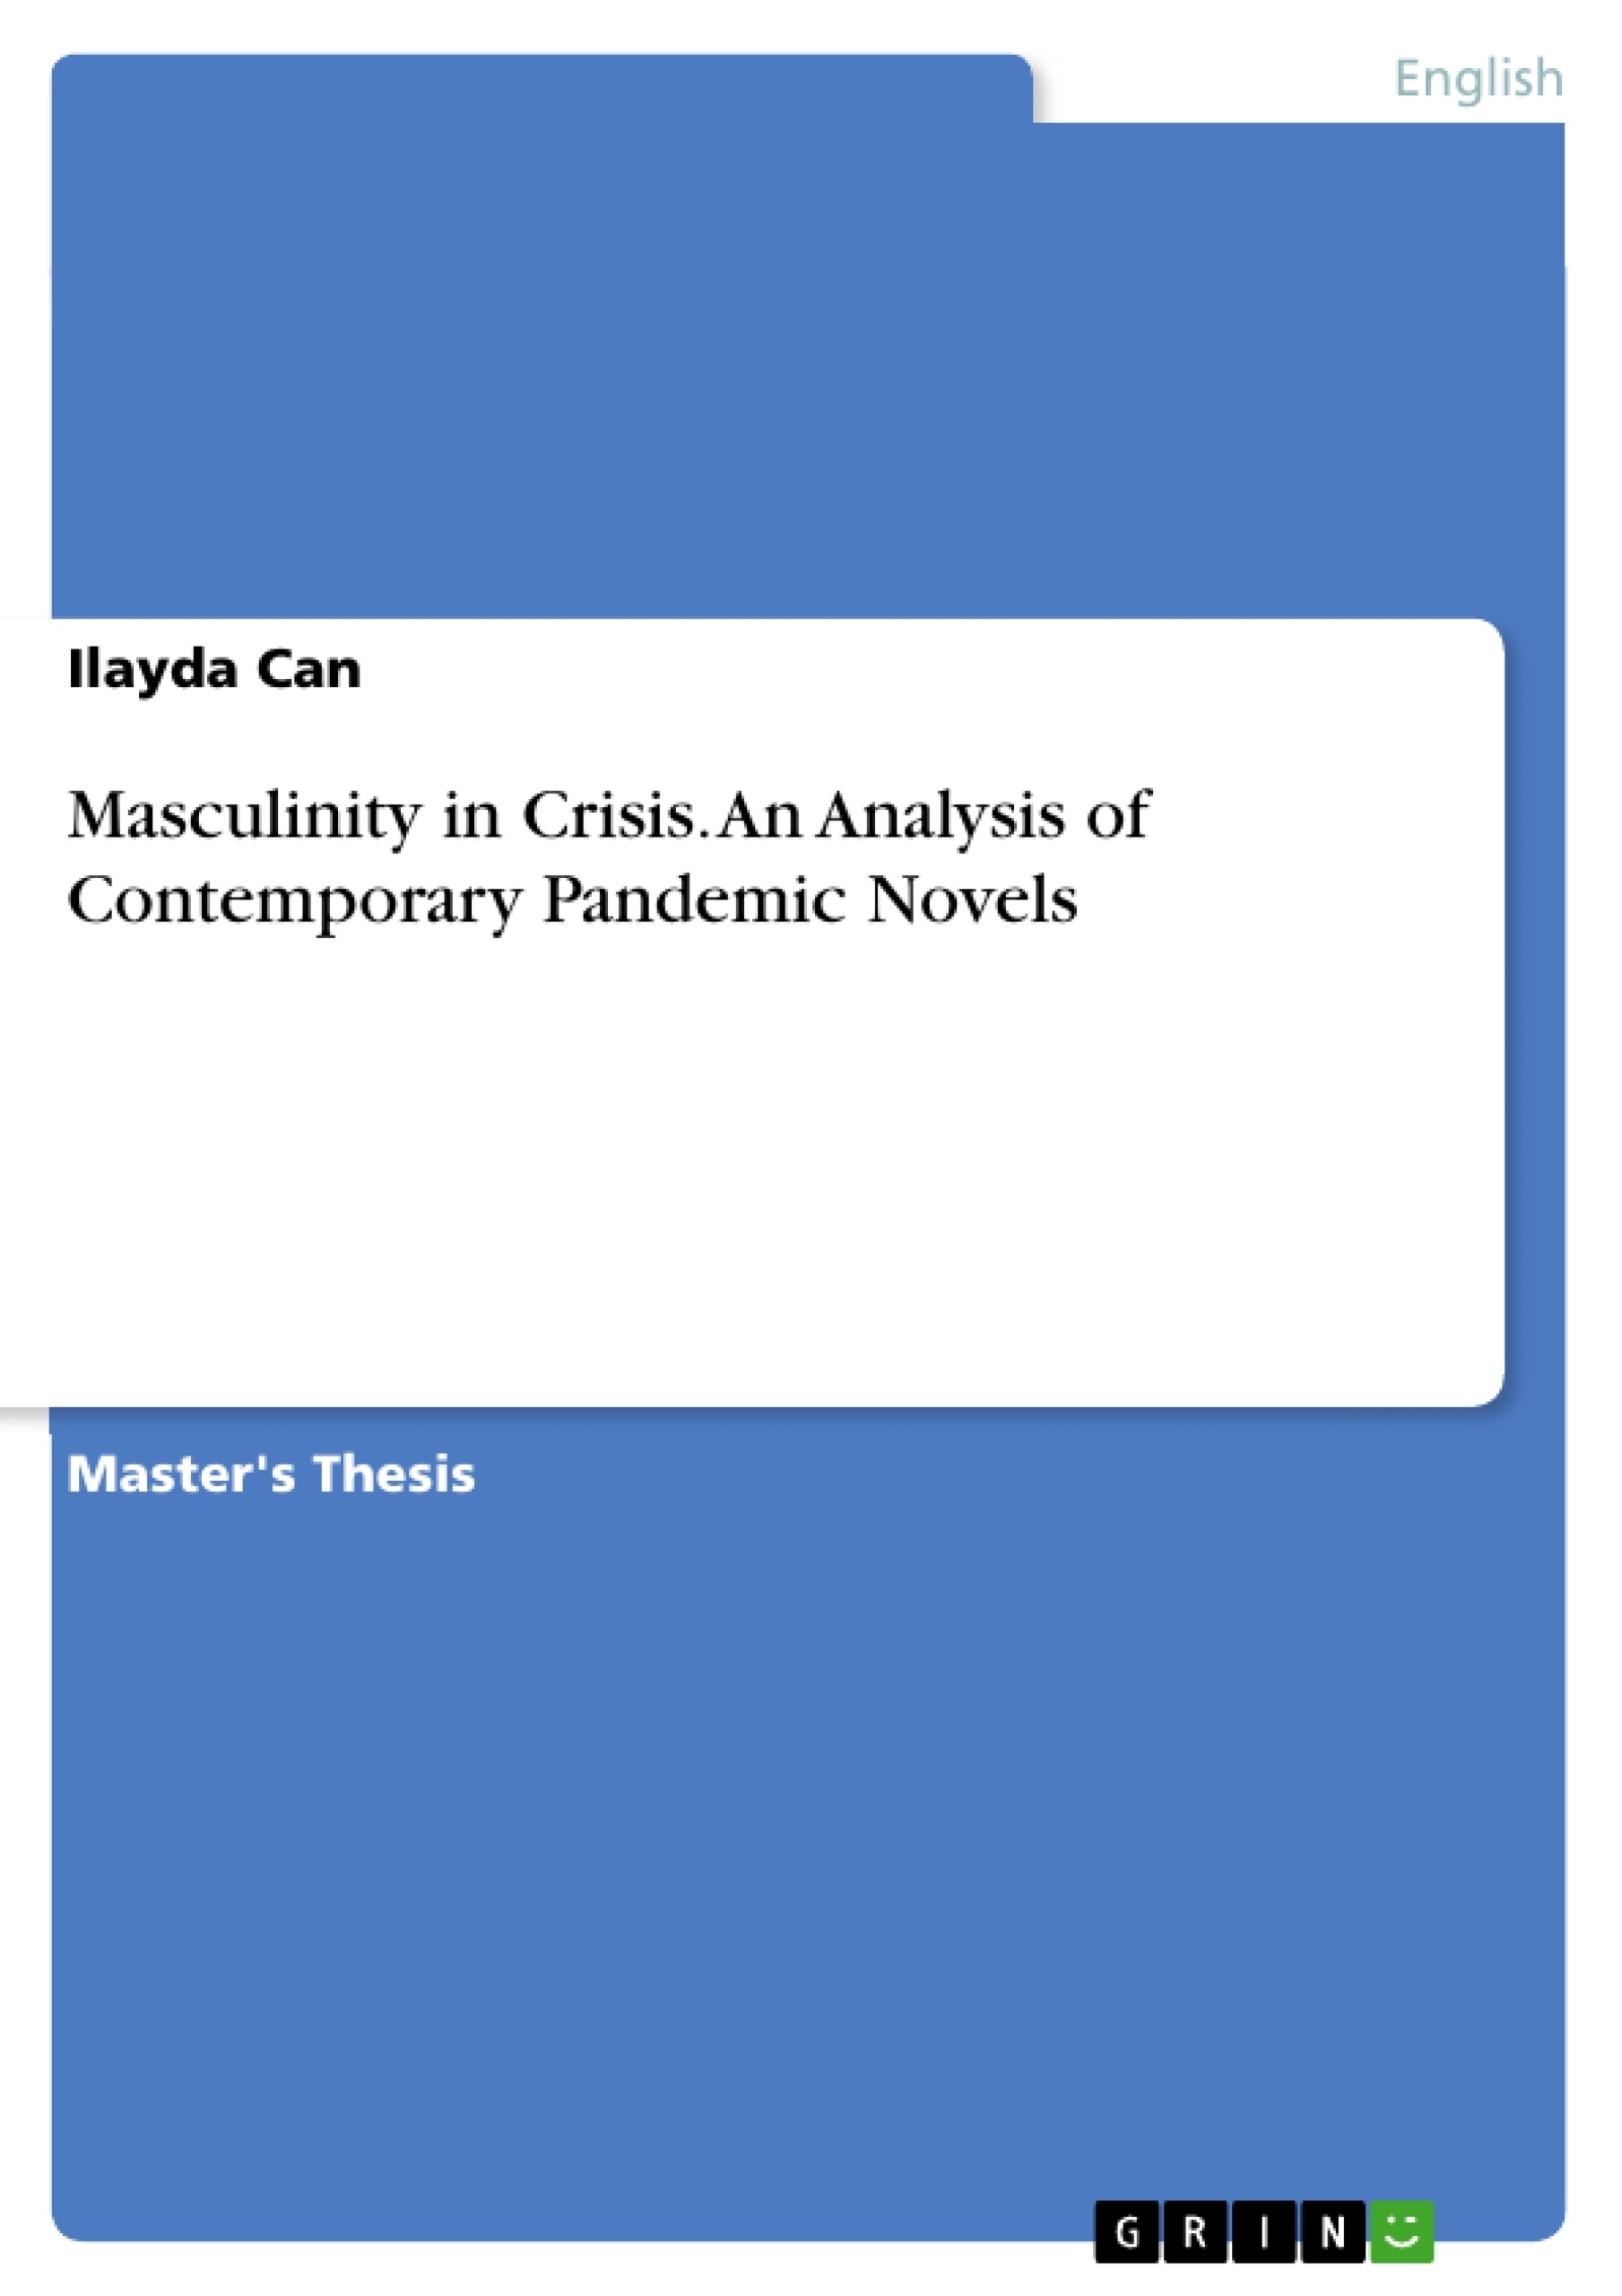 Titre: Masculinity in Crisis. An Analysis of Contemporary Pandemic Novels